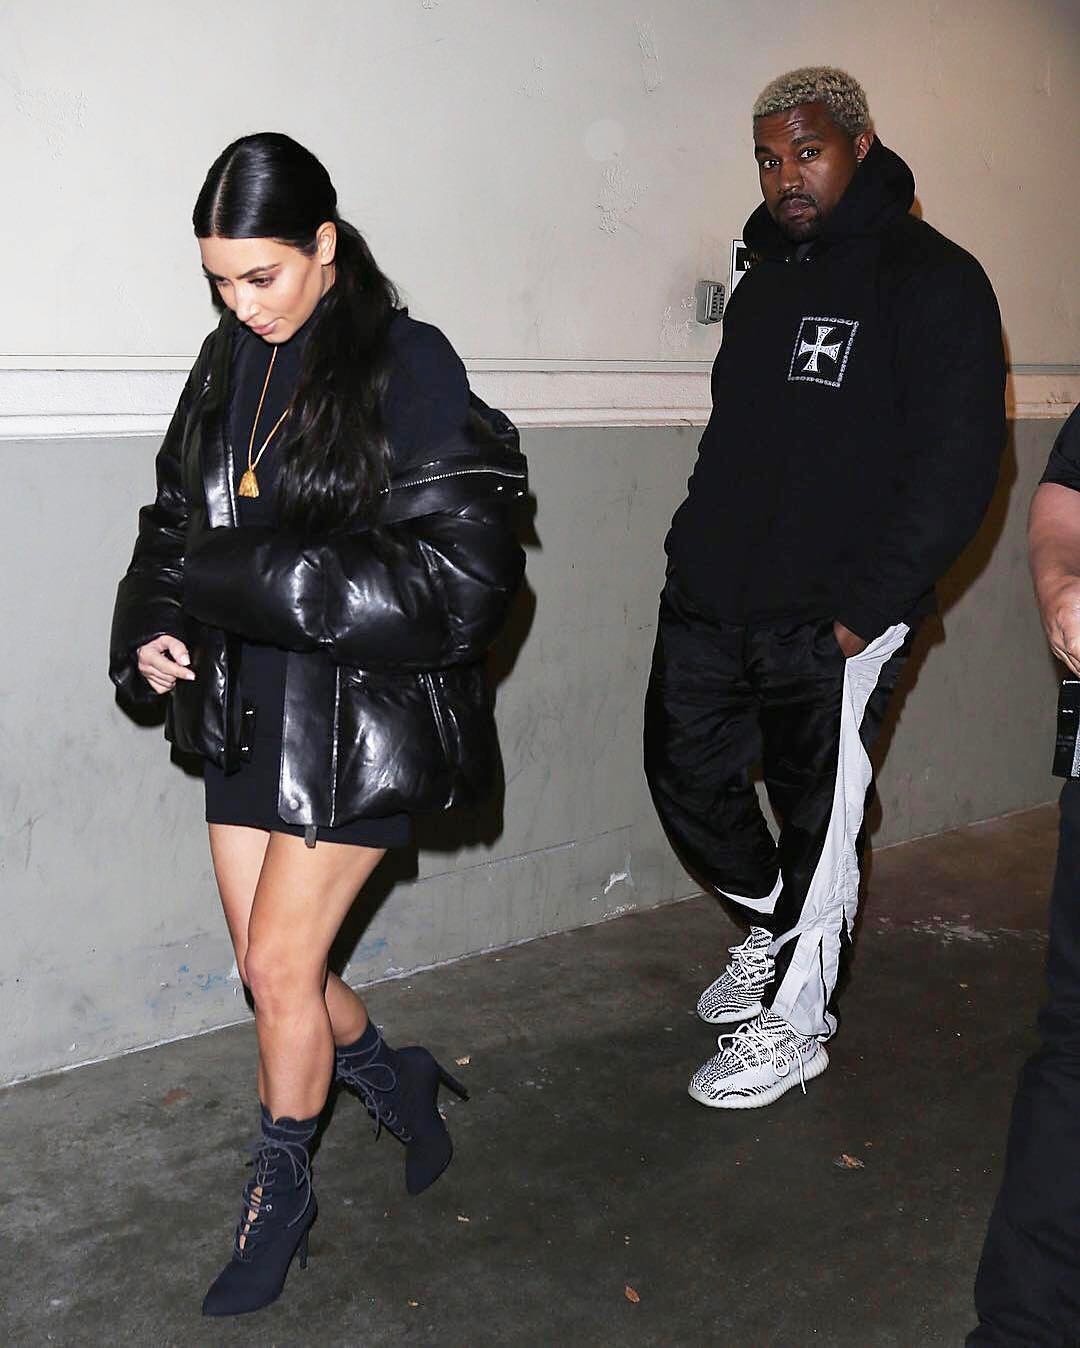 SPOTTED: Kanye West Seen With Kim Kardashian In Enfants Riches Deprime and Yeezy Boost 350 V2s